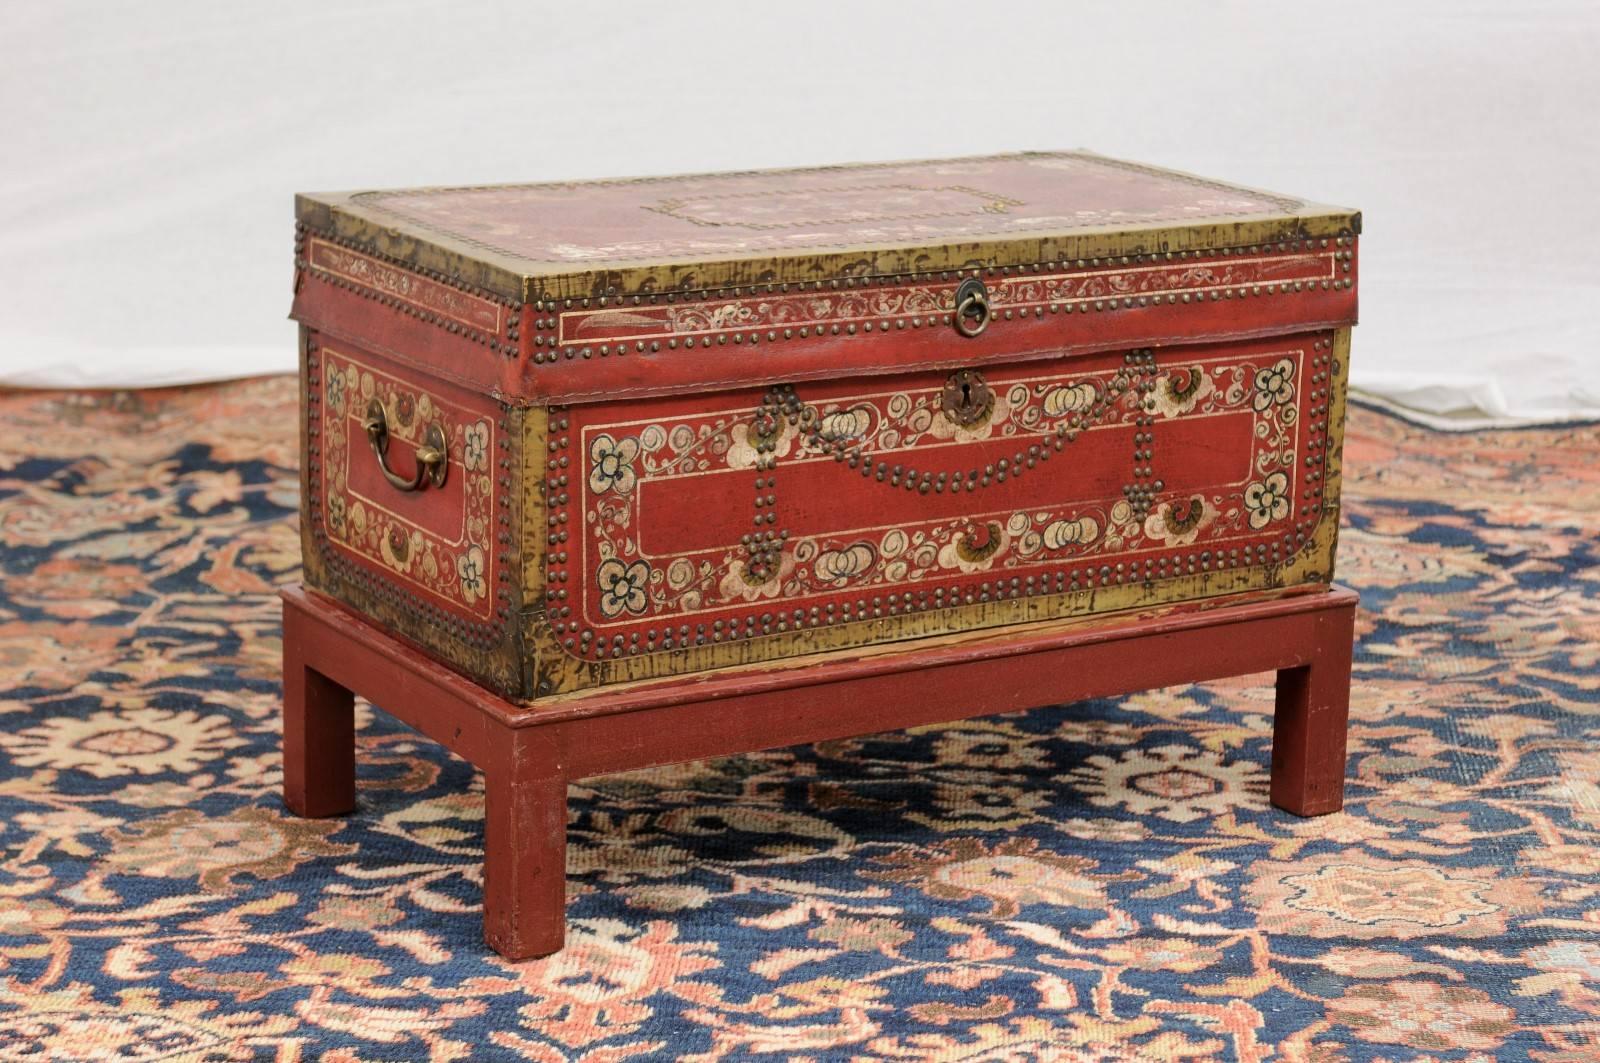 This English camphor wood trunk on stand from the late 19th century features a painted leather body with brass accents in the corners and nailheads. The red background is adorned with white floral motifs and darker accents. The nailheads on the